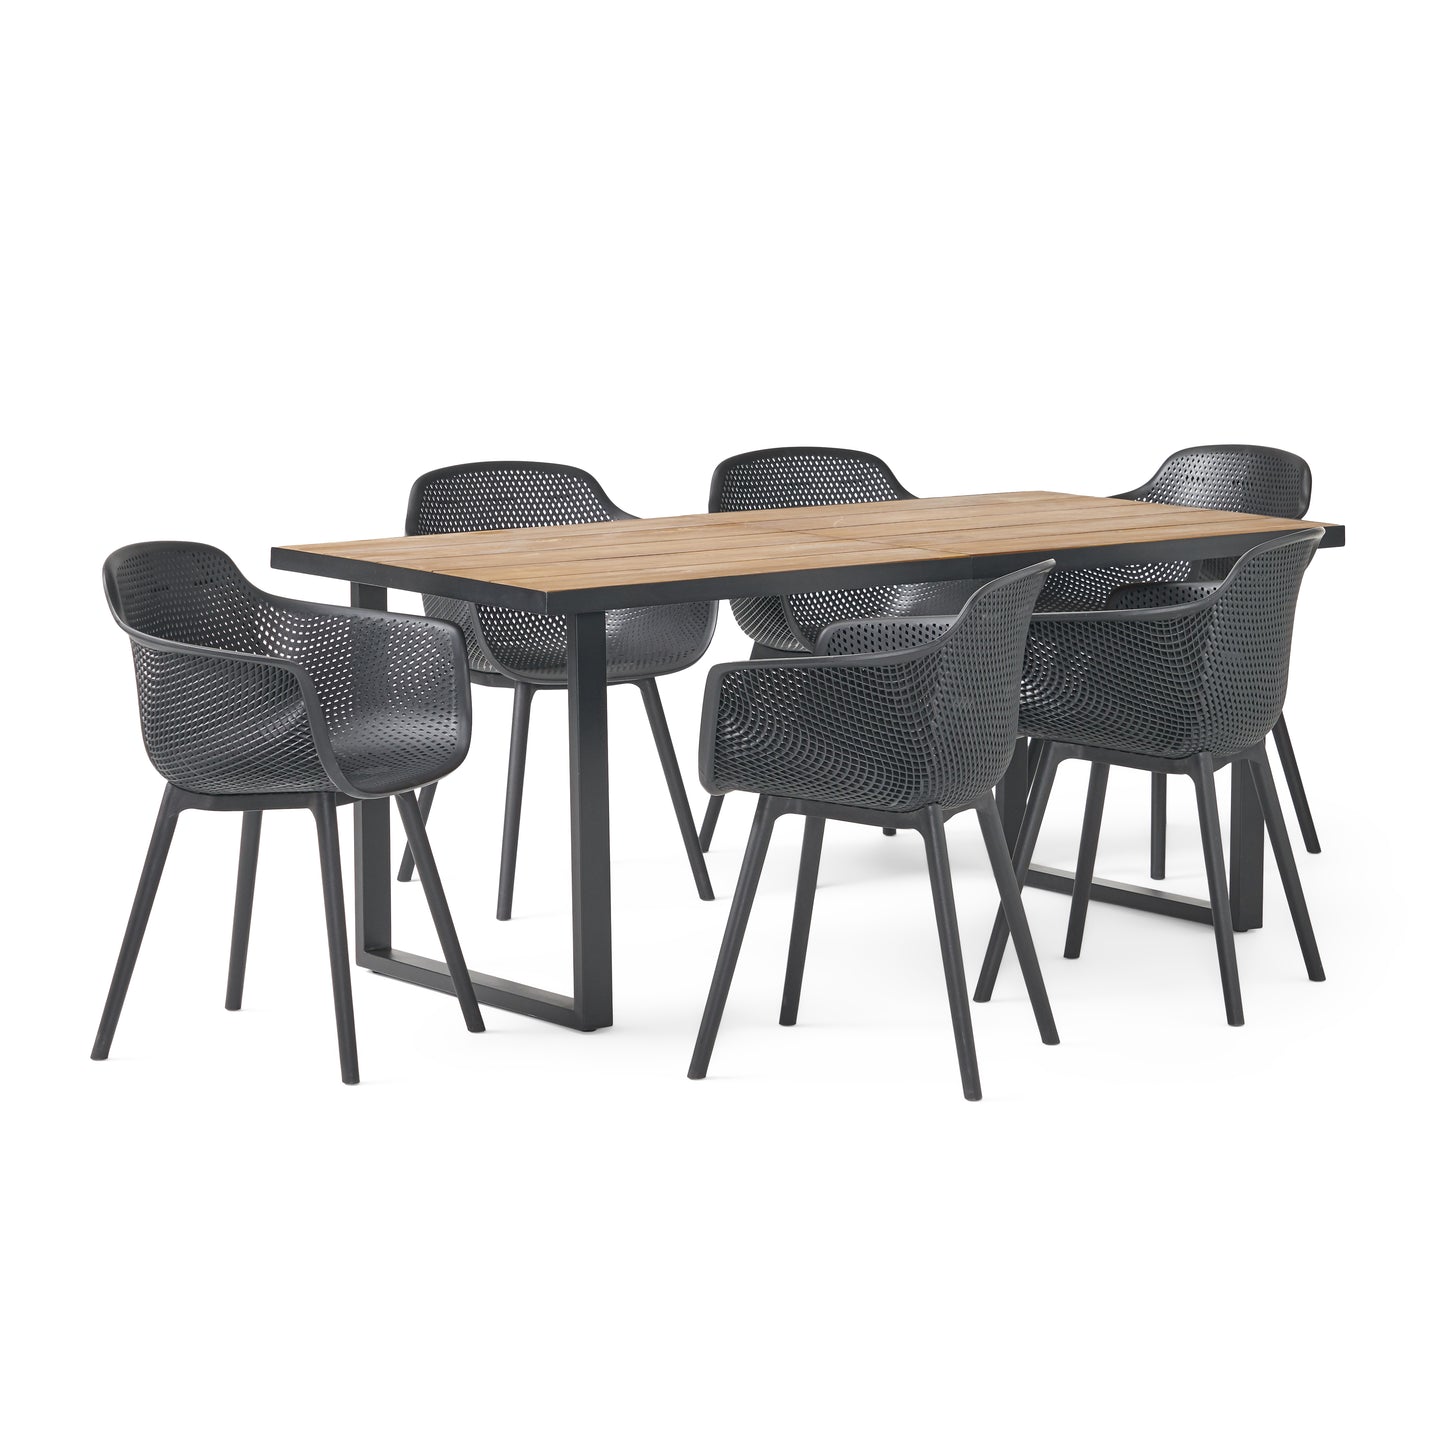 Barbados Outdoor Wood and Resin 7 Piece Dining Set, Black and Teak